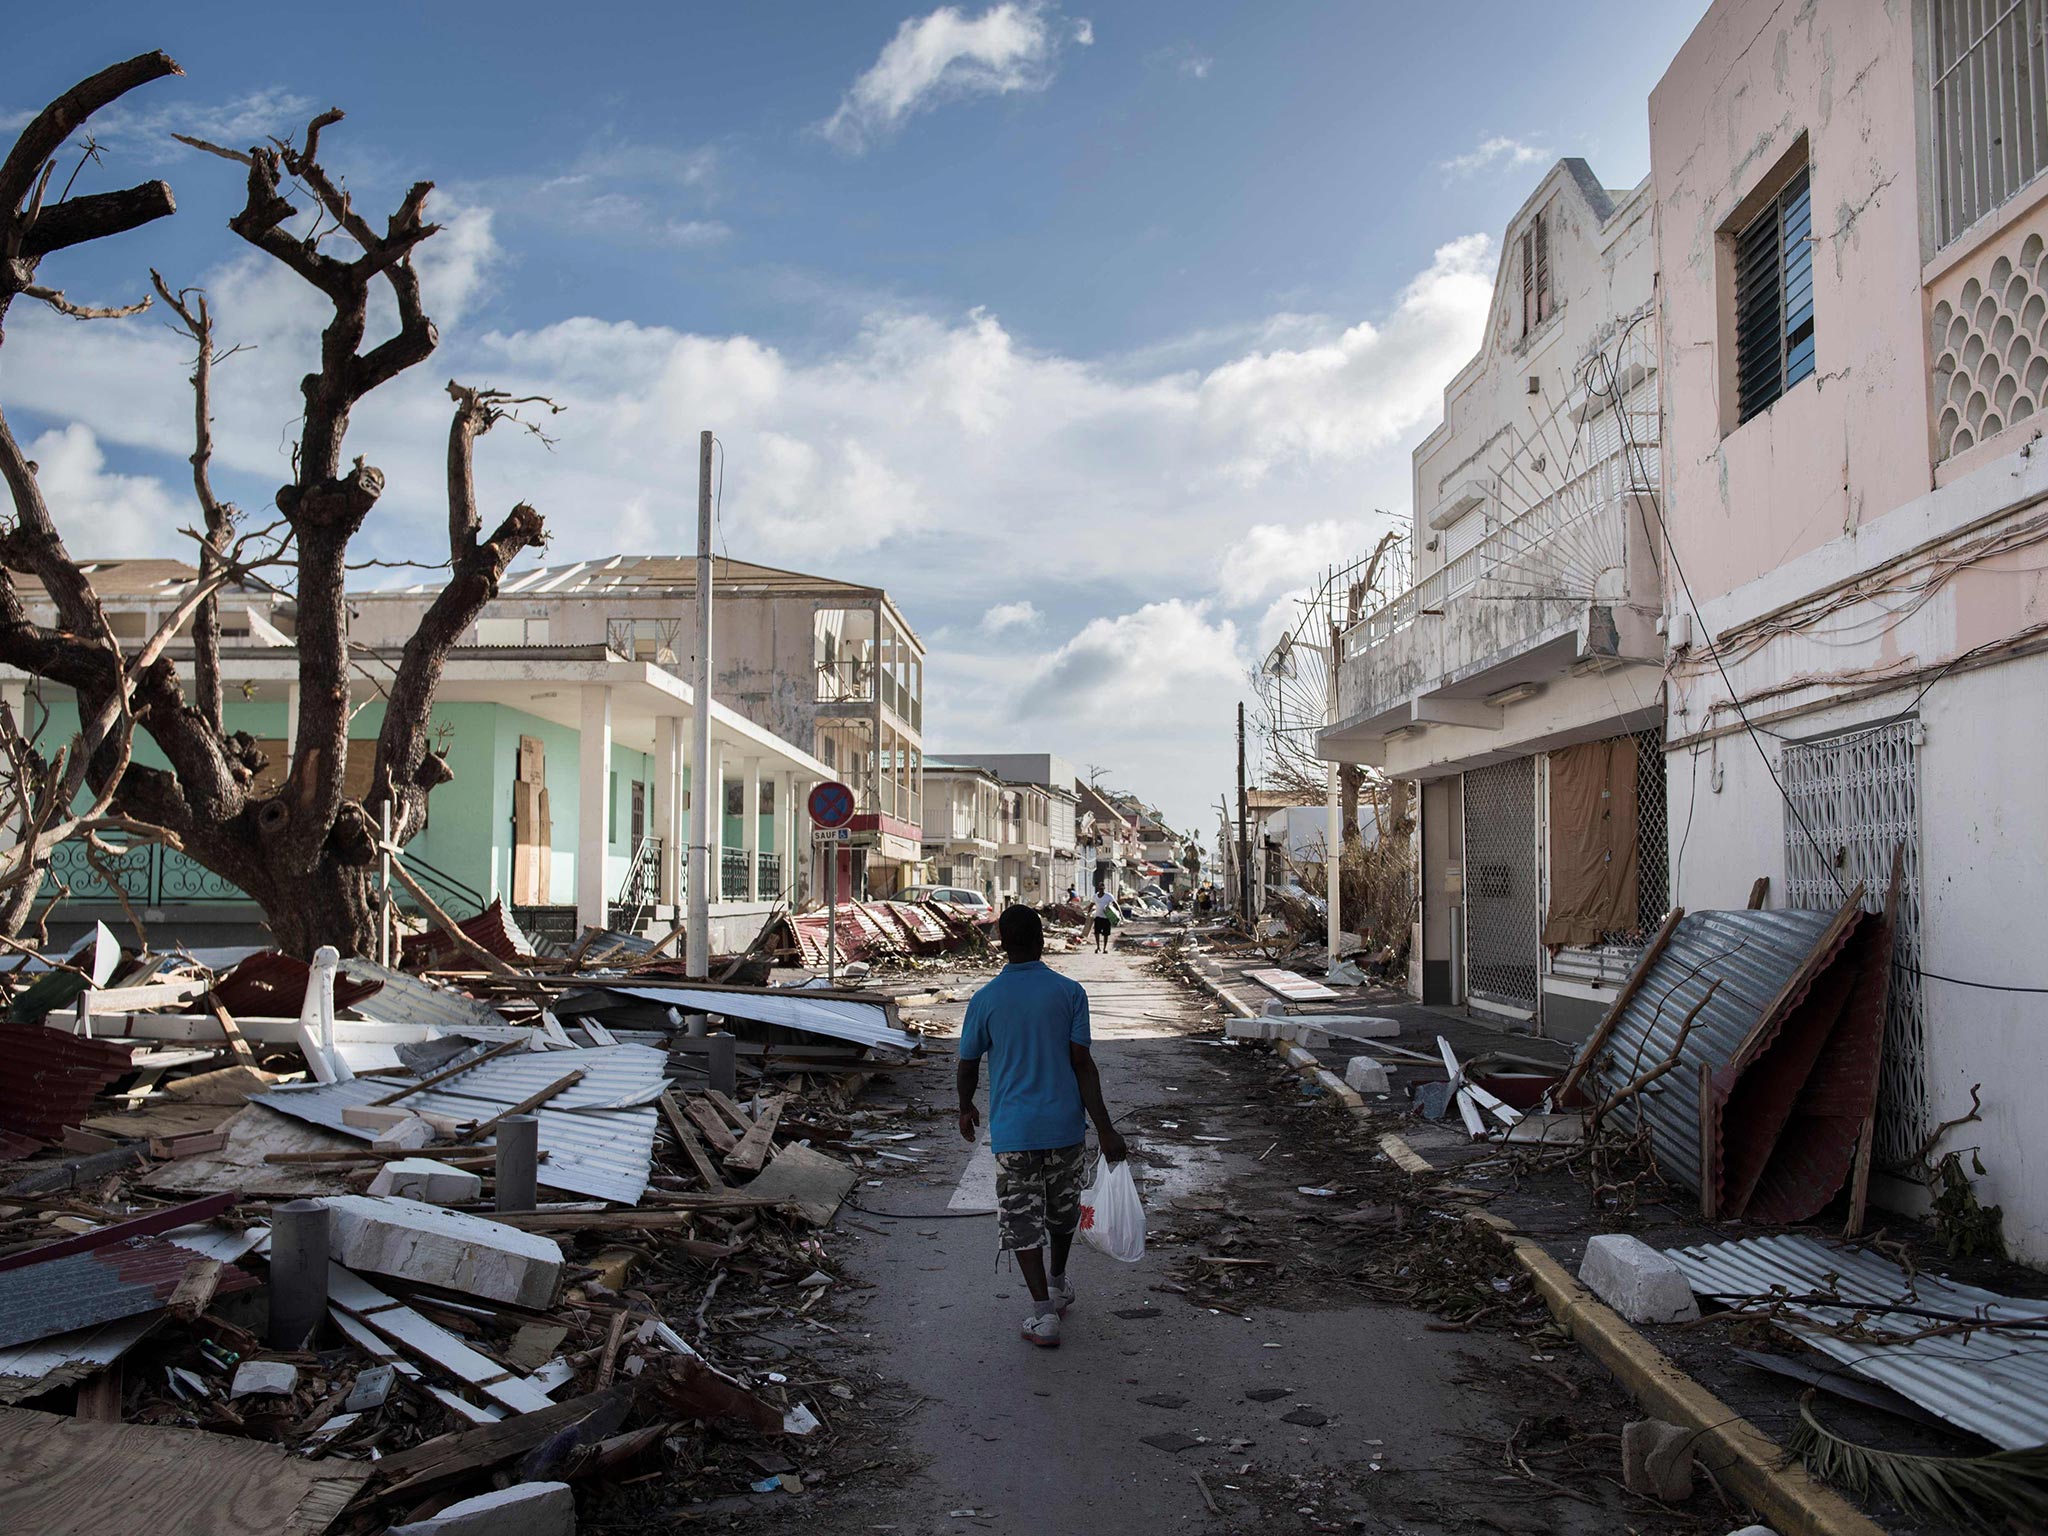 A man walks on a street covered in debris after Hurricane Irma strikes the Saint Martin in the Caribbean in 2017